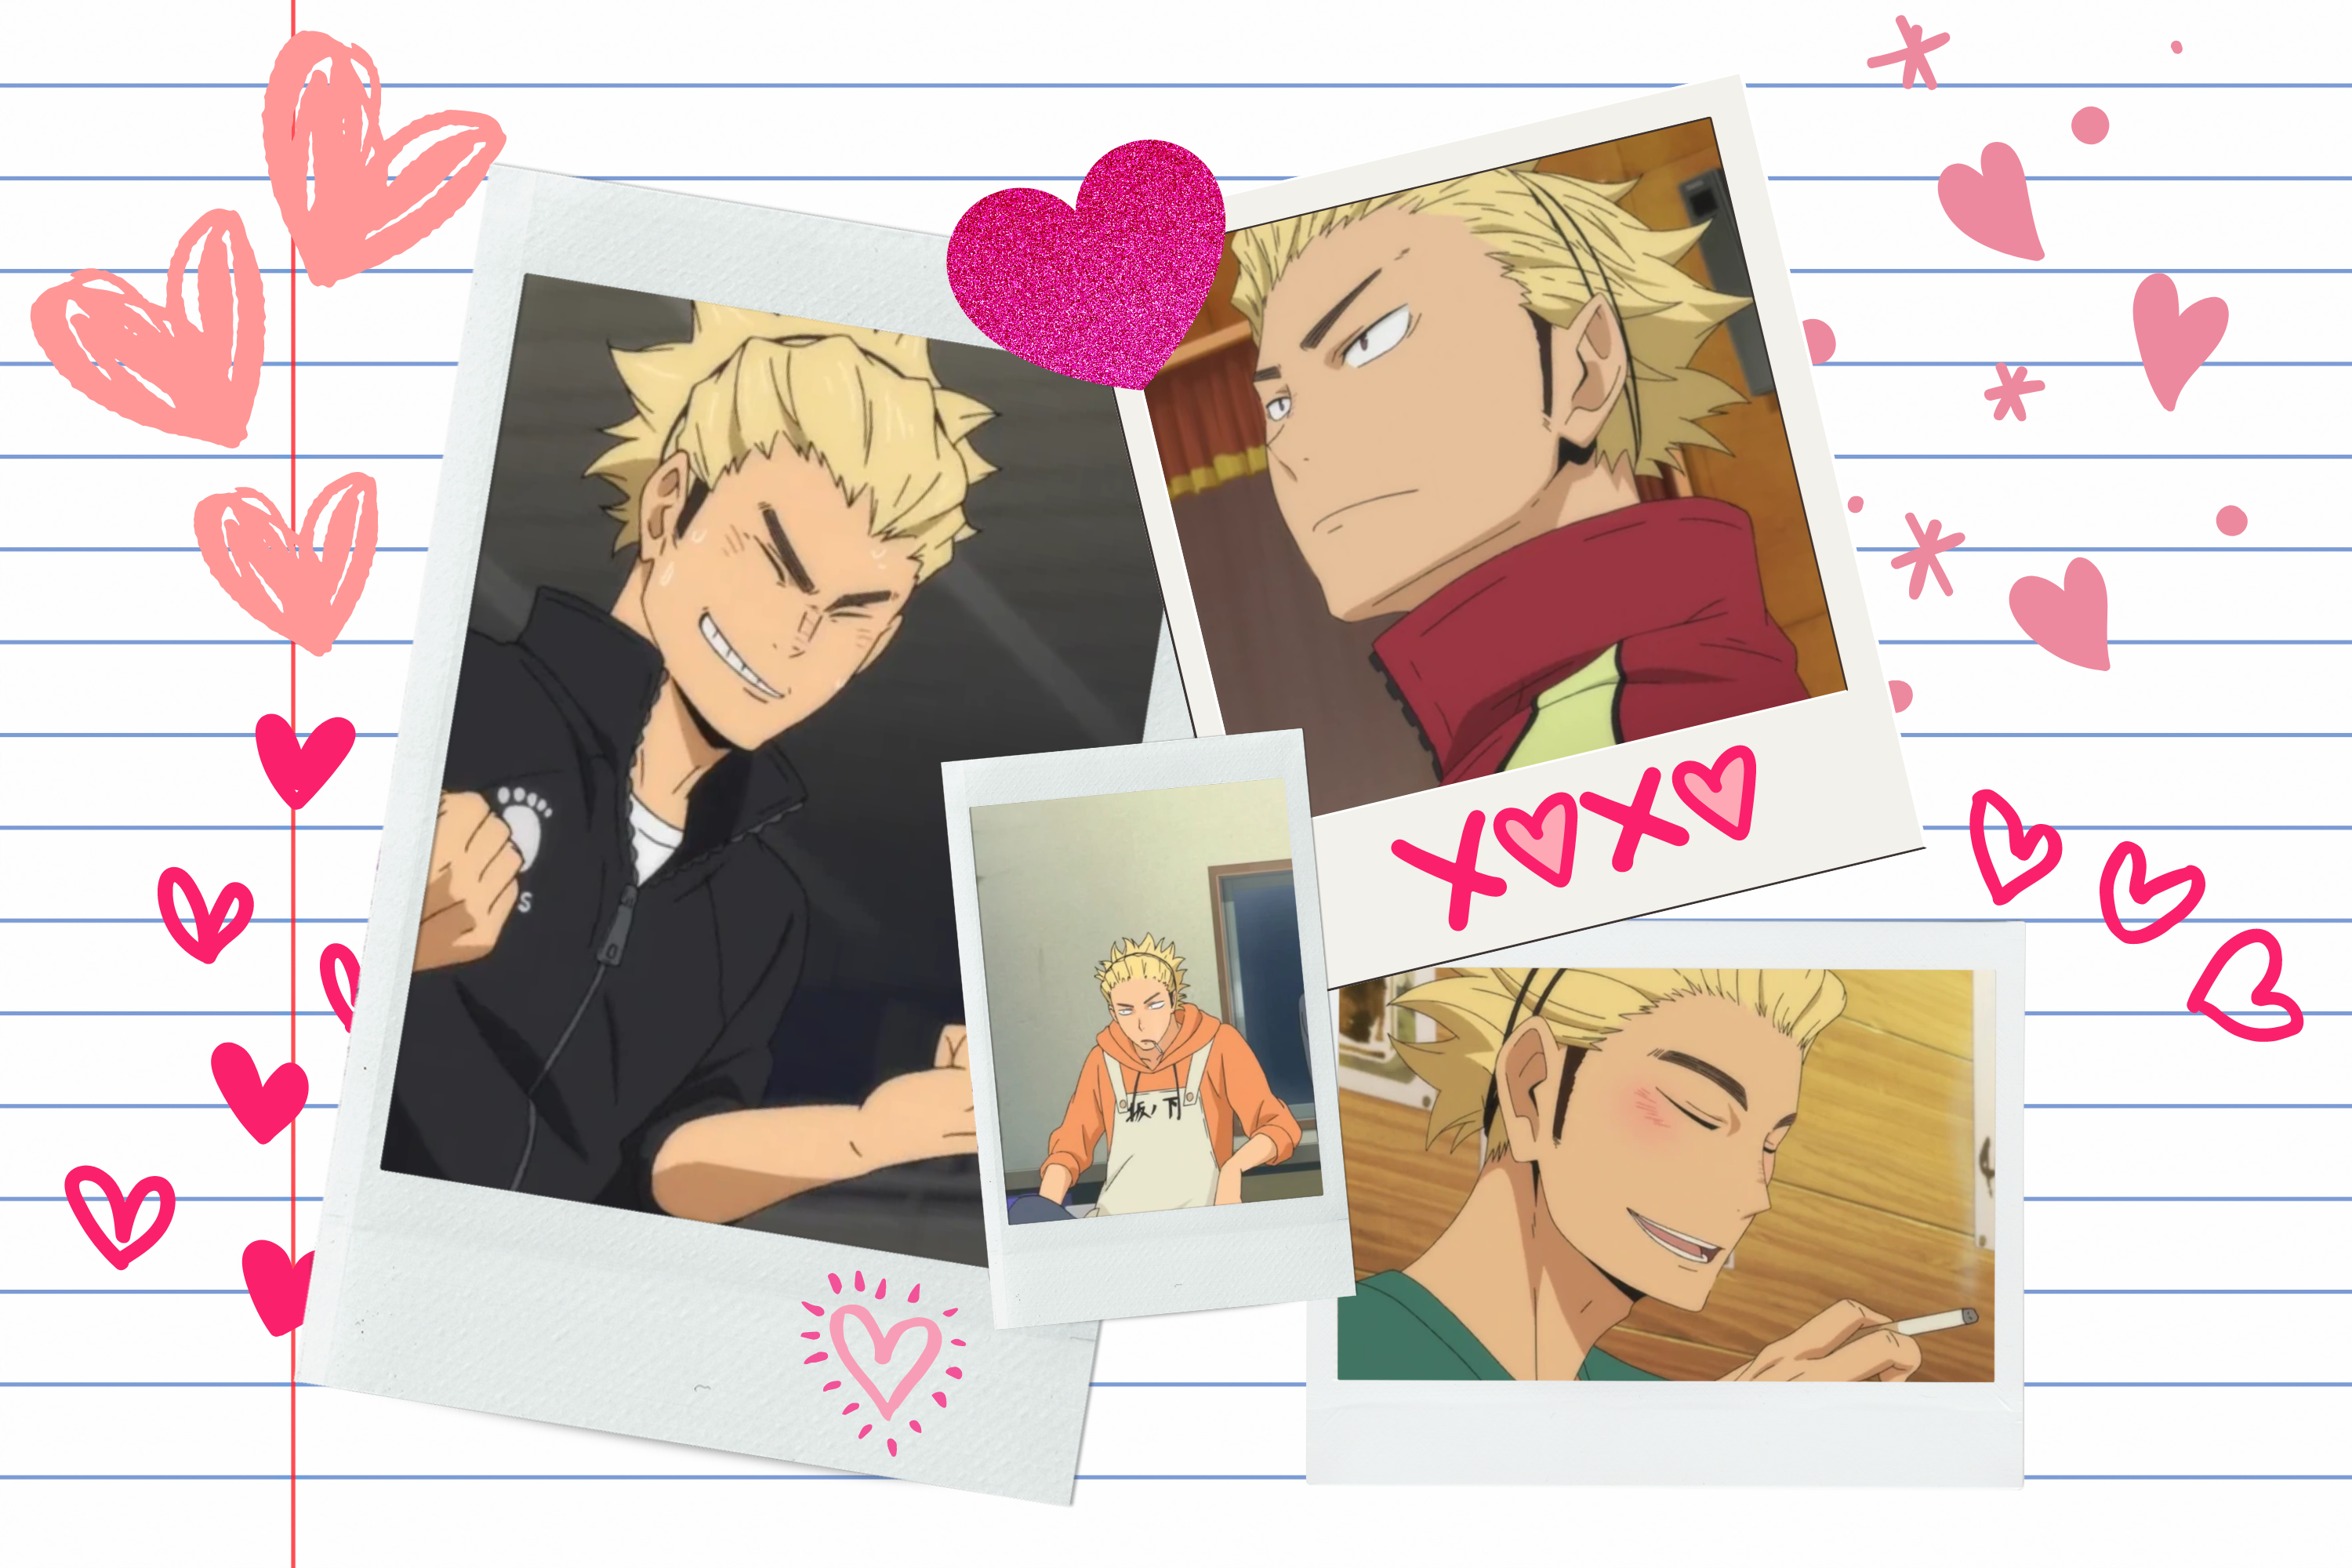 A collection of polaroids featuring Coach Ukai, an animated man with long dirty blonde hair pulled back, framed by little hearts